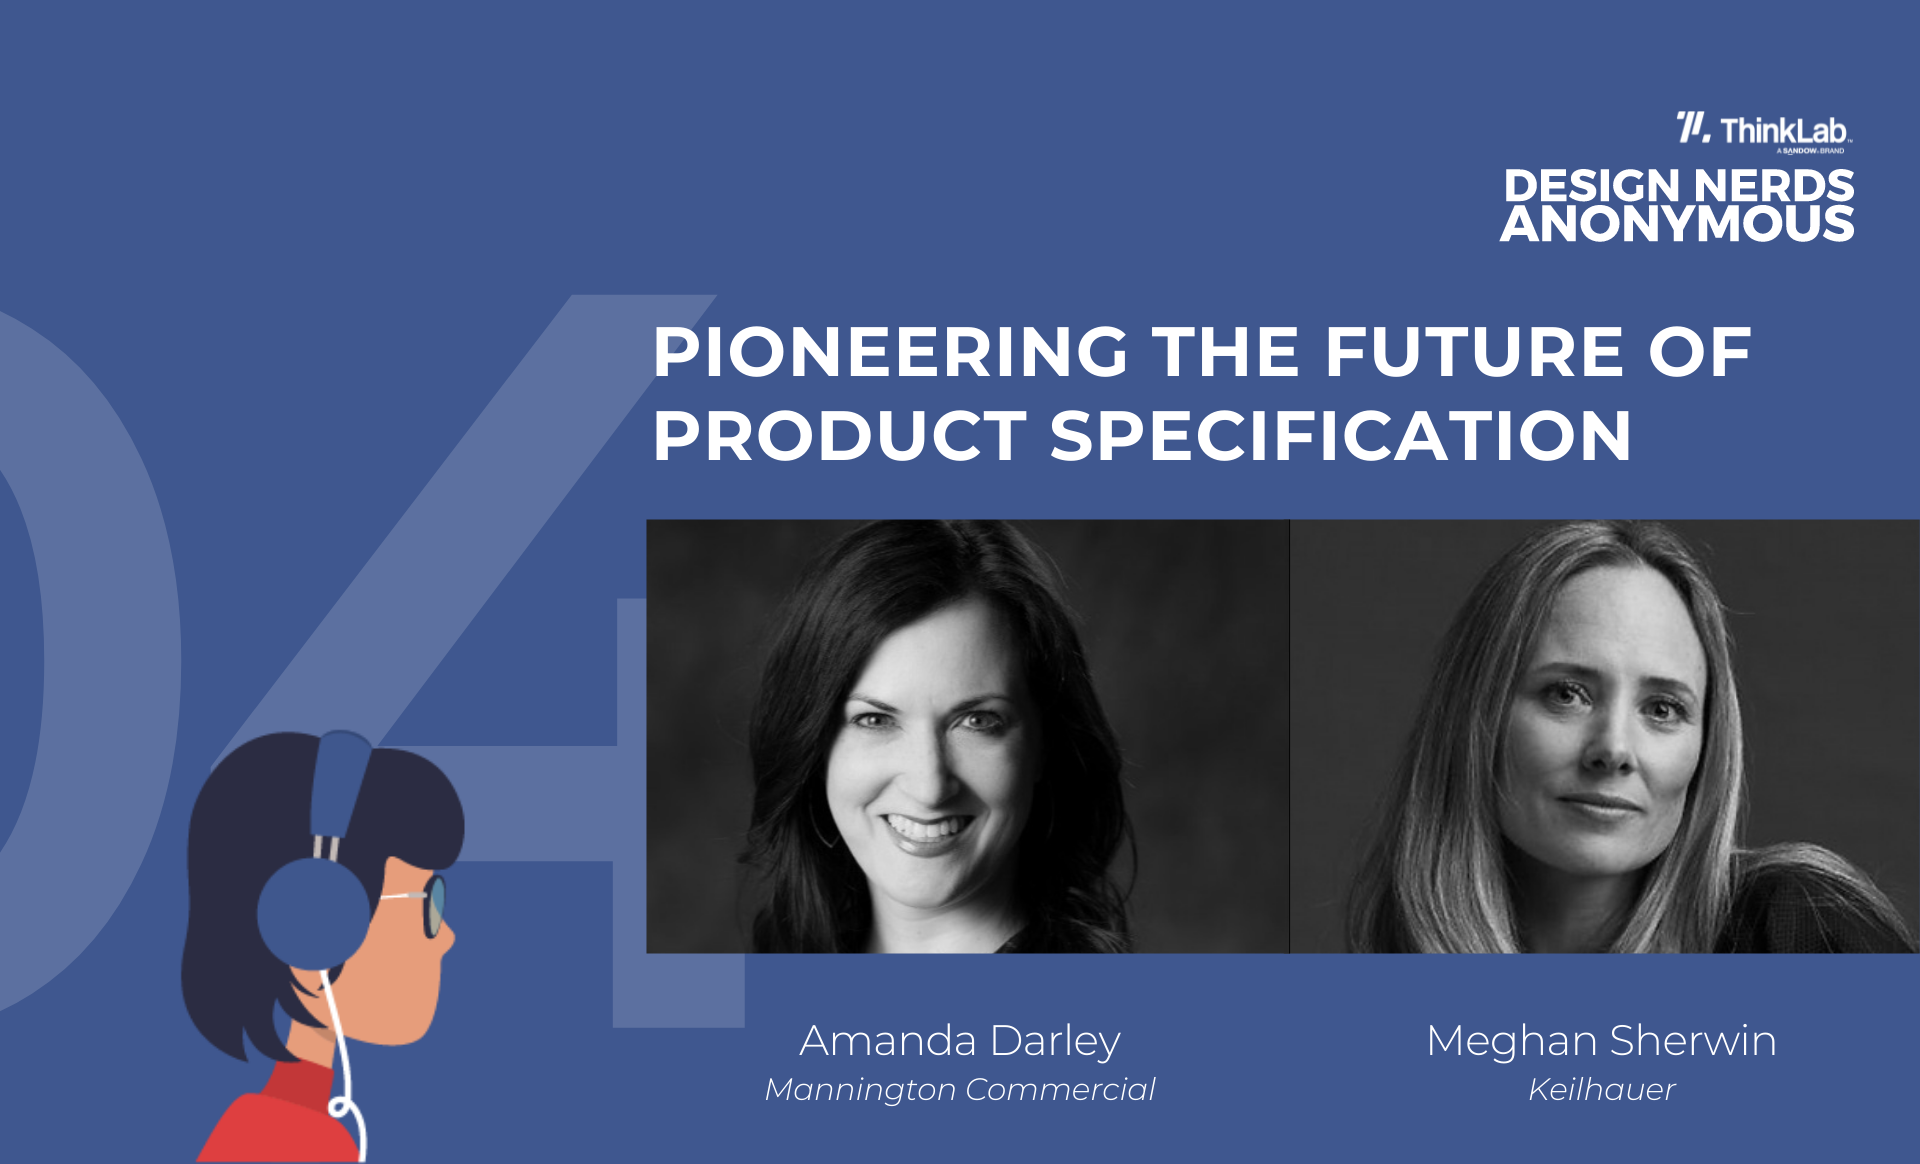 ThinkLab Design Nerds Anonymous Podcast on Pioneering the Future of Product Specification